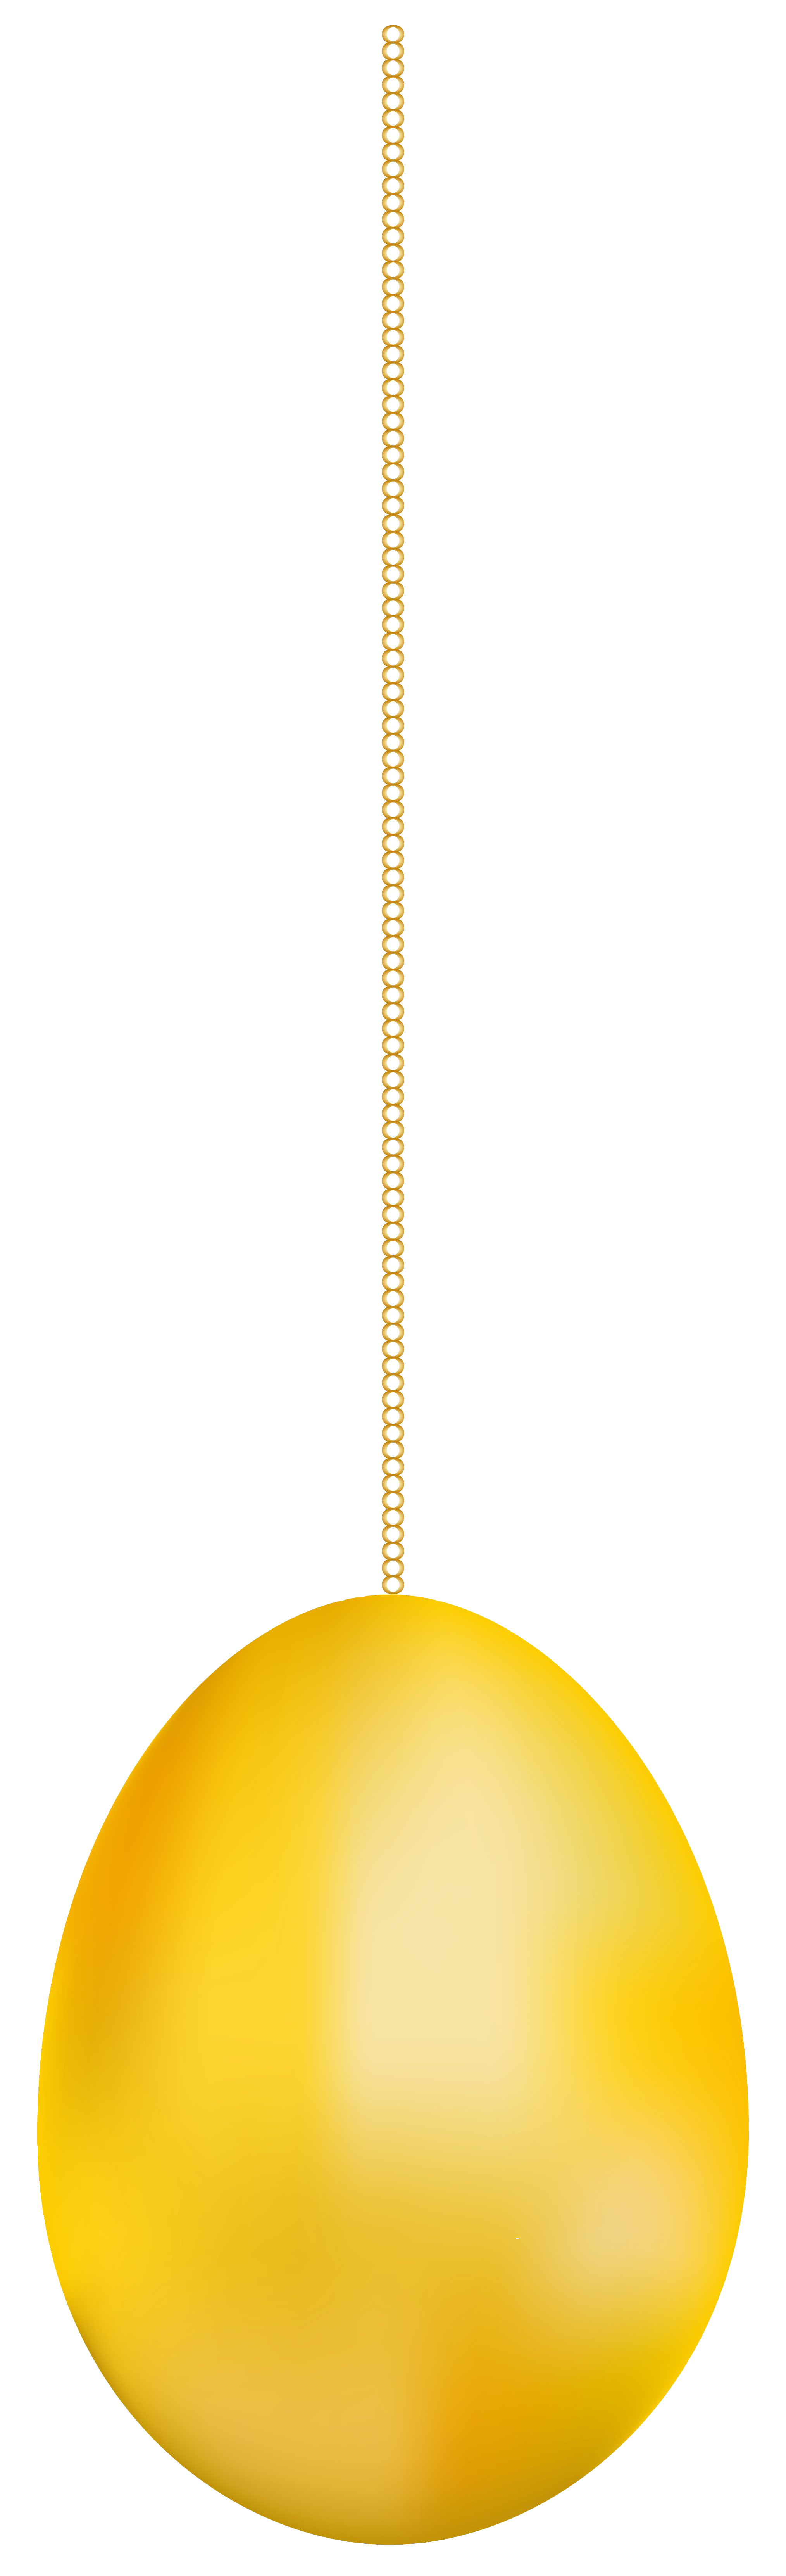 Plain Easter Egg Yellow Download HD PNG Image